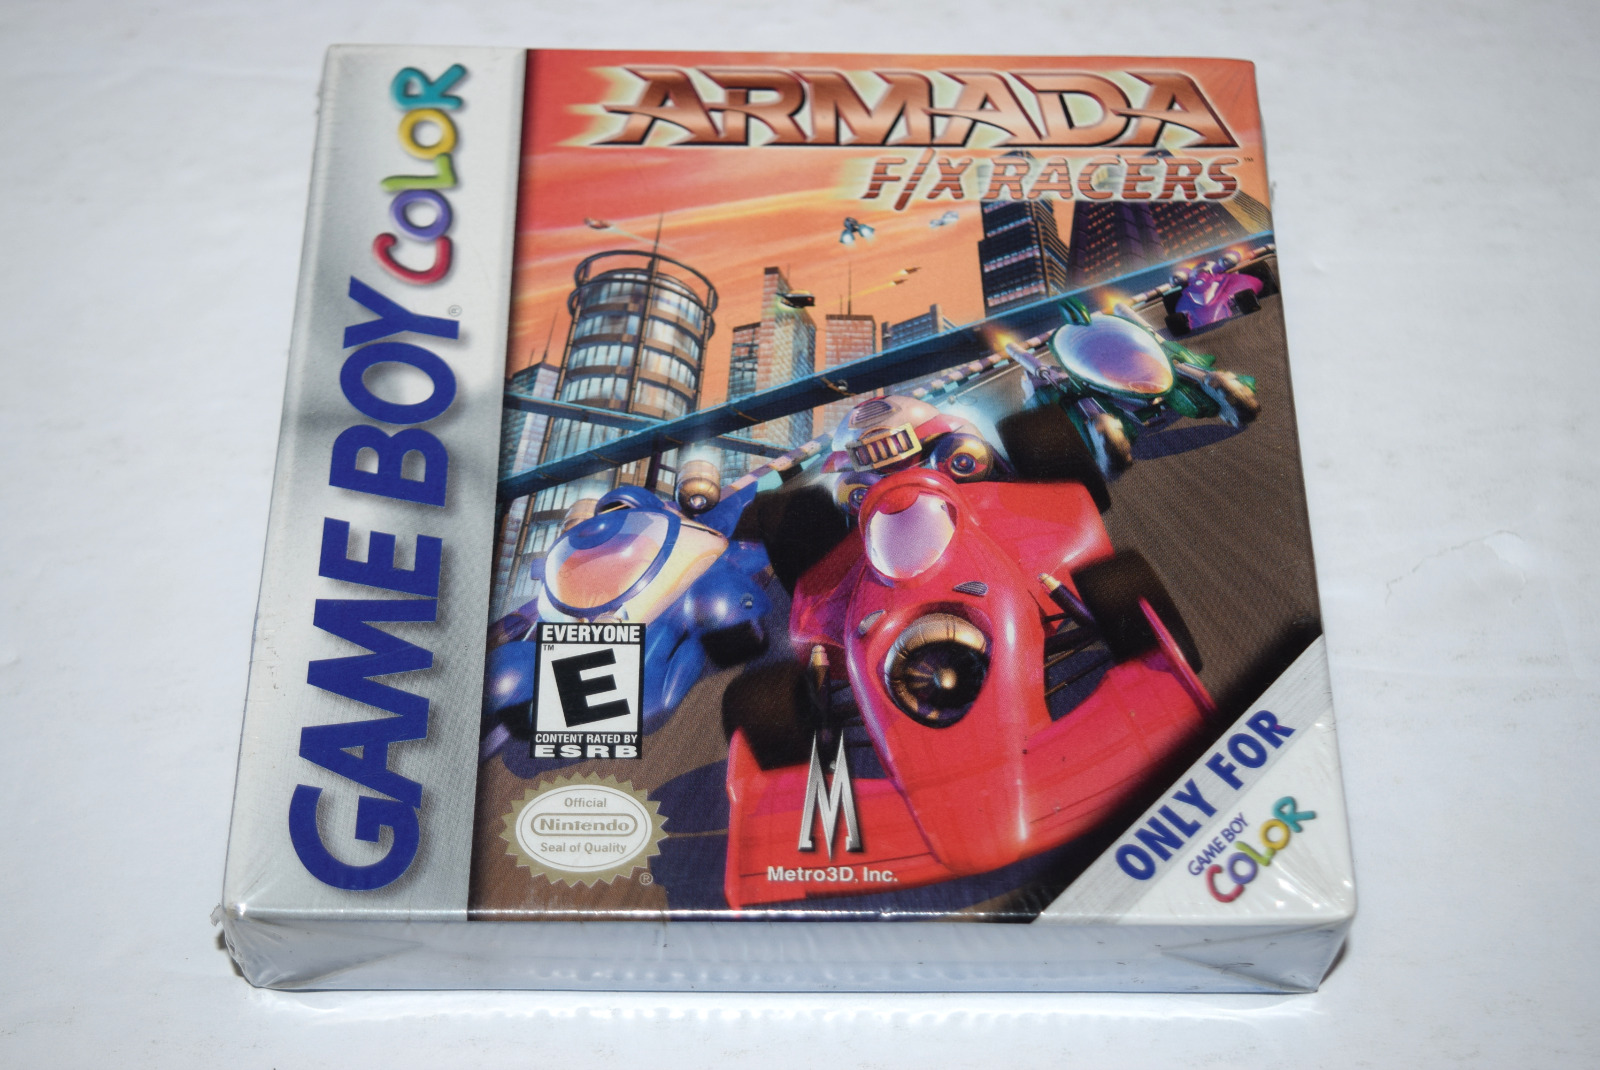 Armada F/X Racers Nintendo Game Boy Color New in H-Seam Shrinkwrapped Box